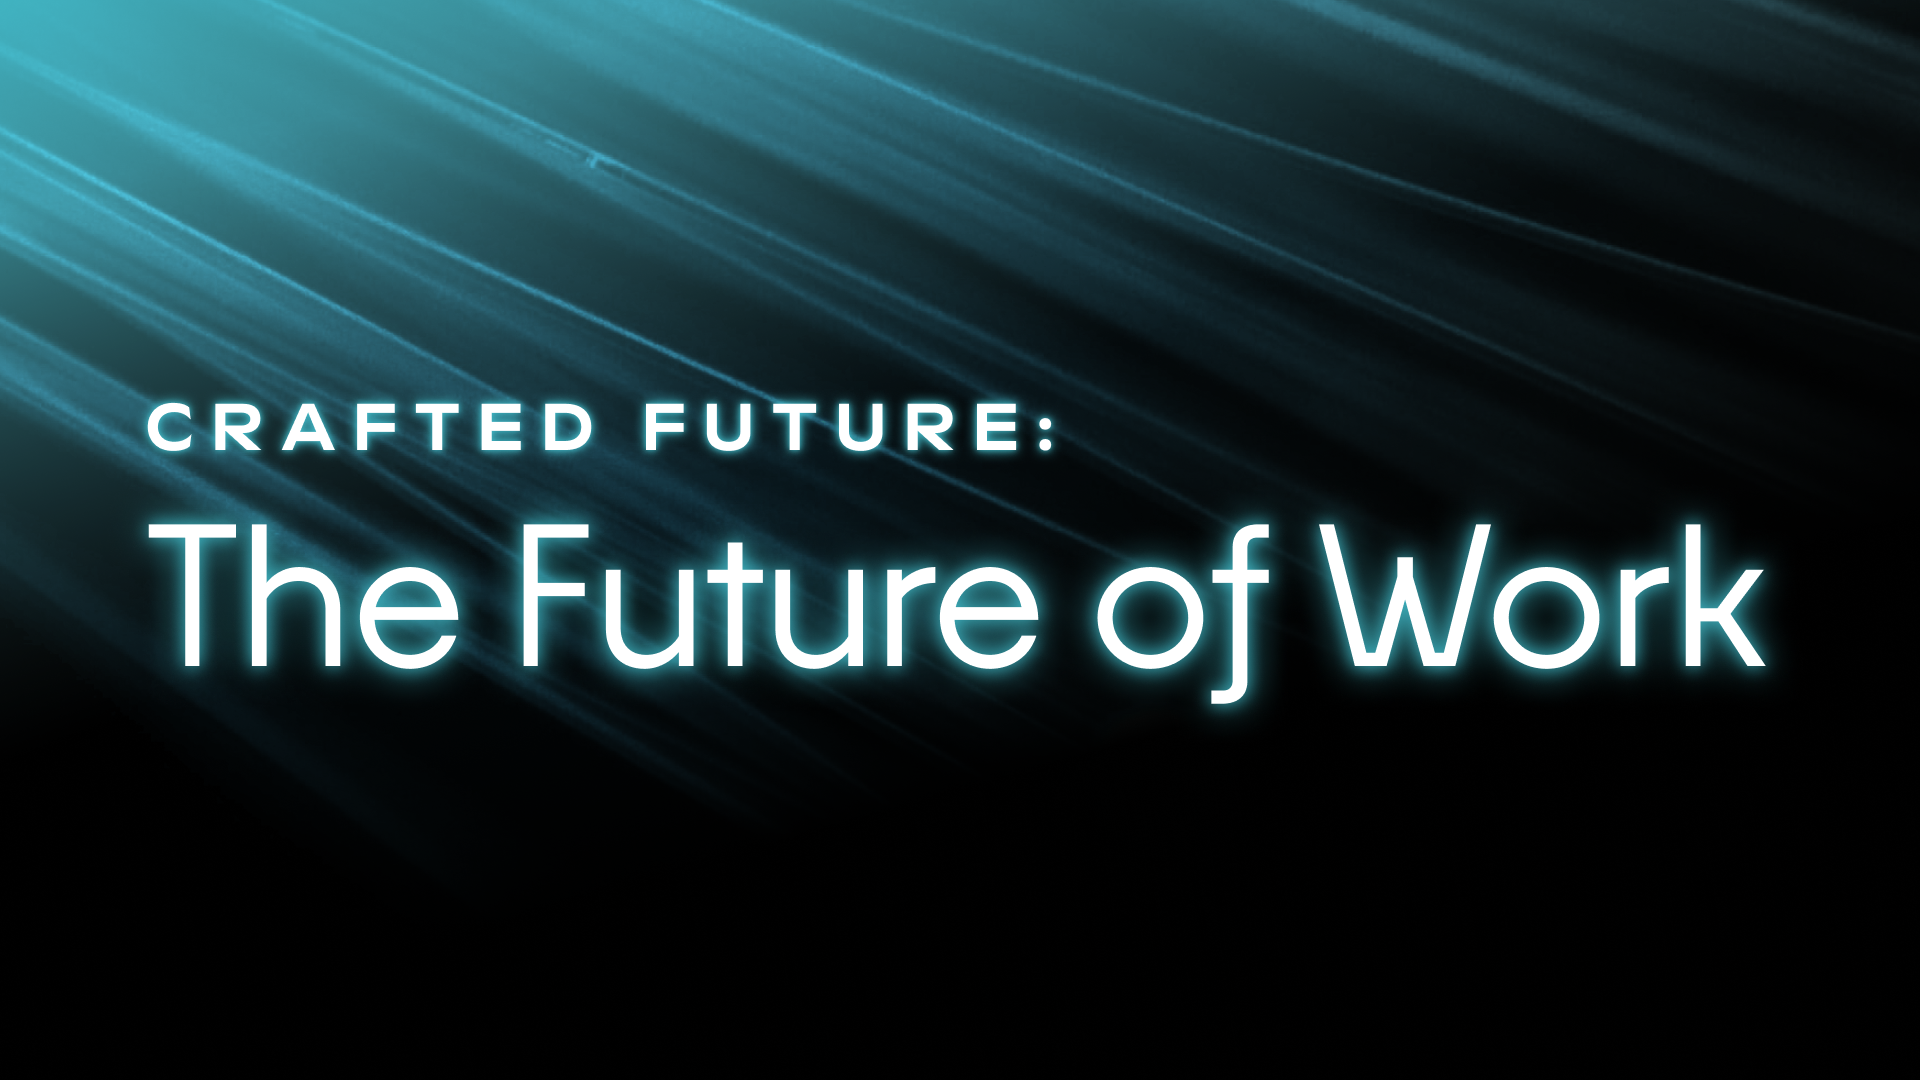 Crafted Future: The Future of Work